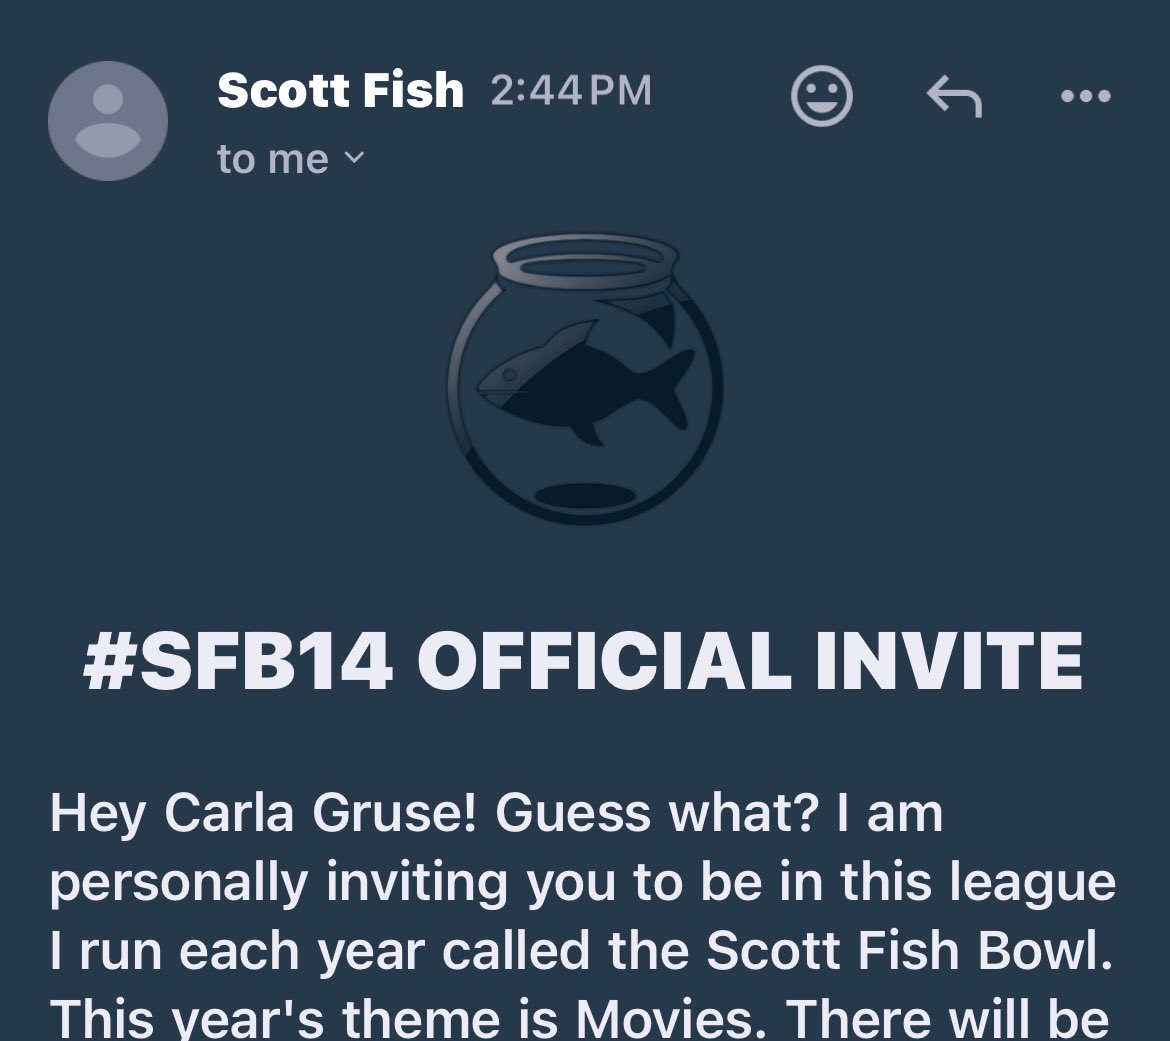 L👀k!!!!   I am so excited!   Thank you @ScottFish24 and your team for the invite!   Let’s go!!! #SFB14 so blessed!